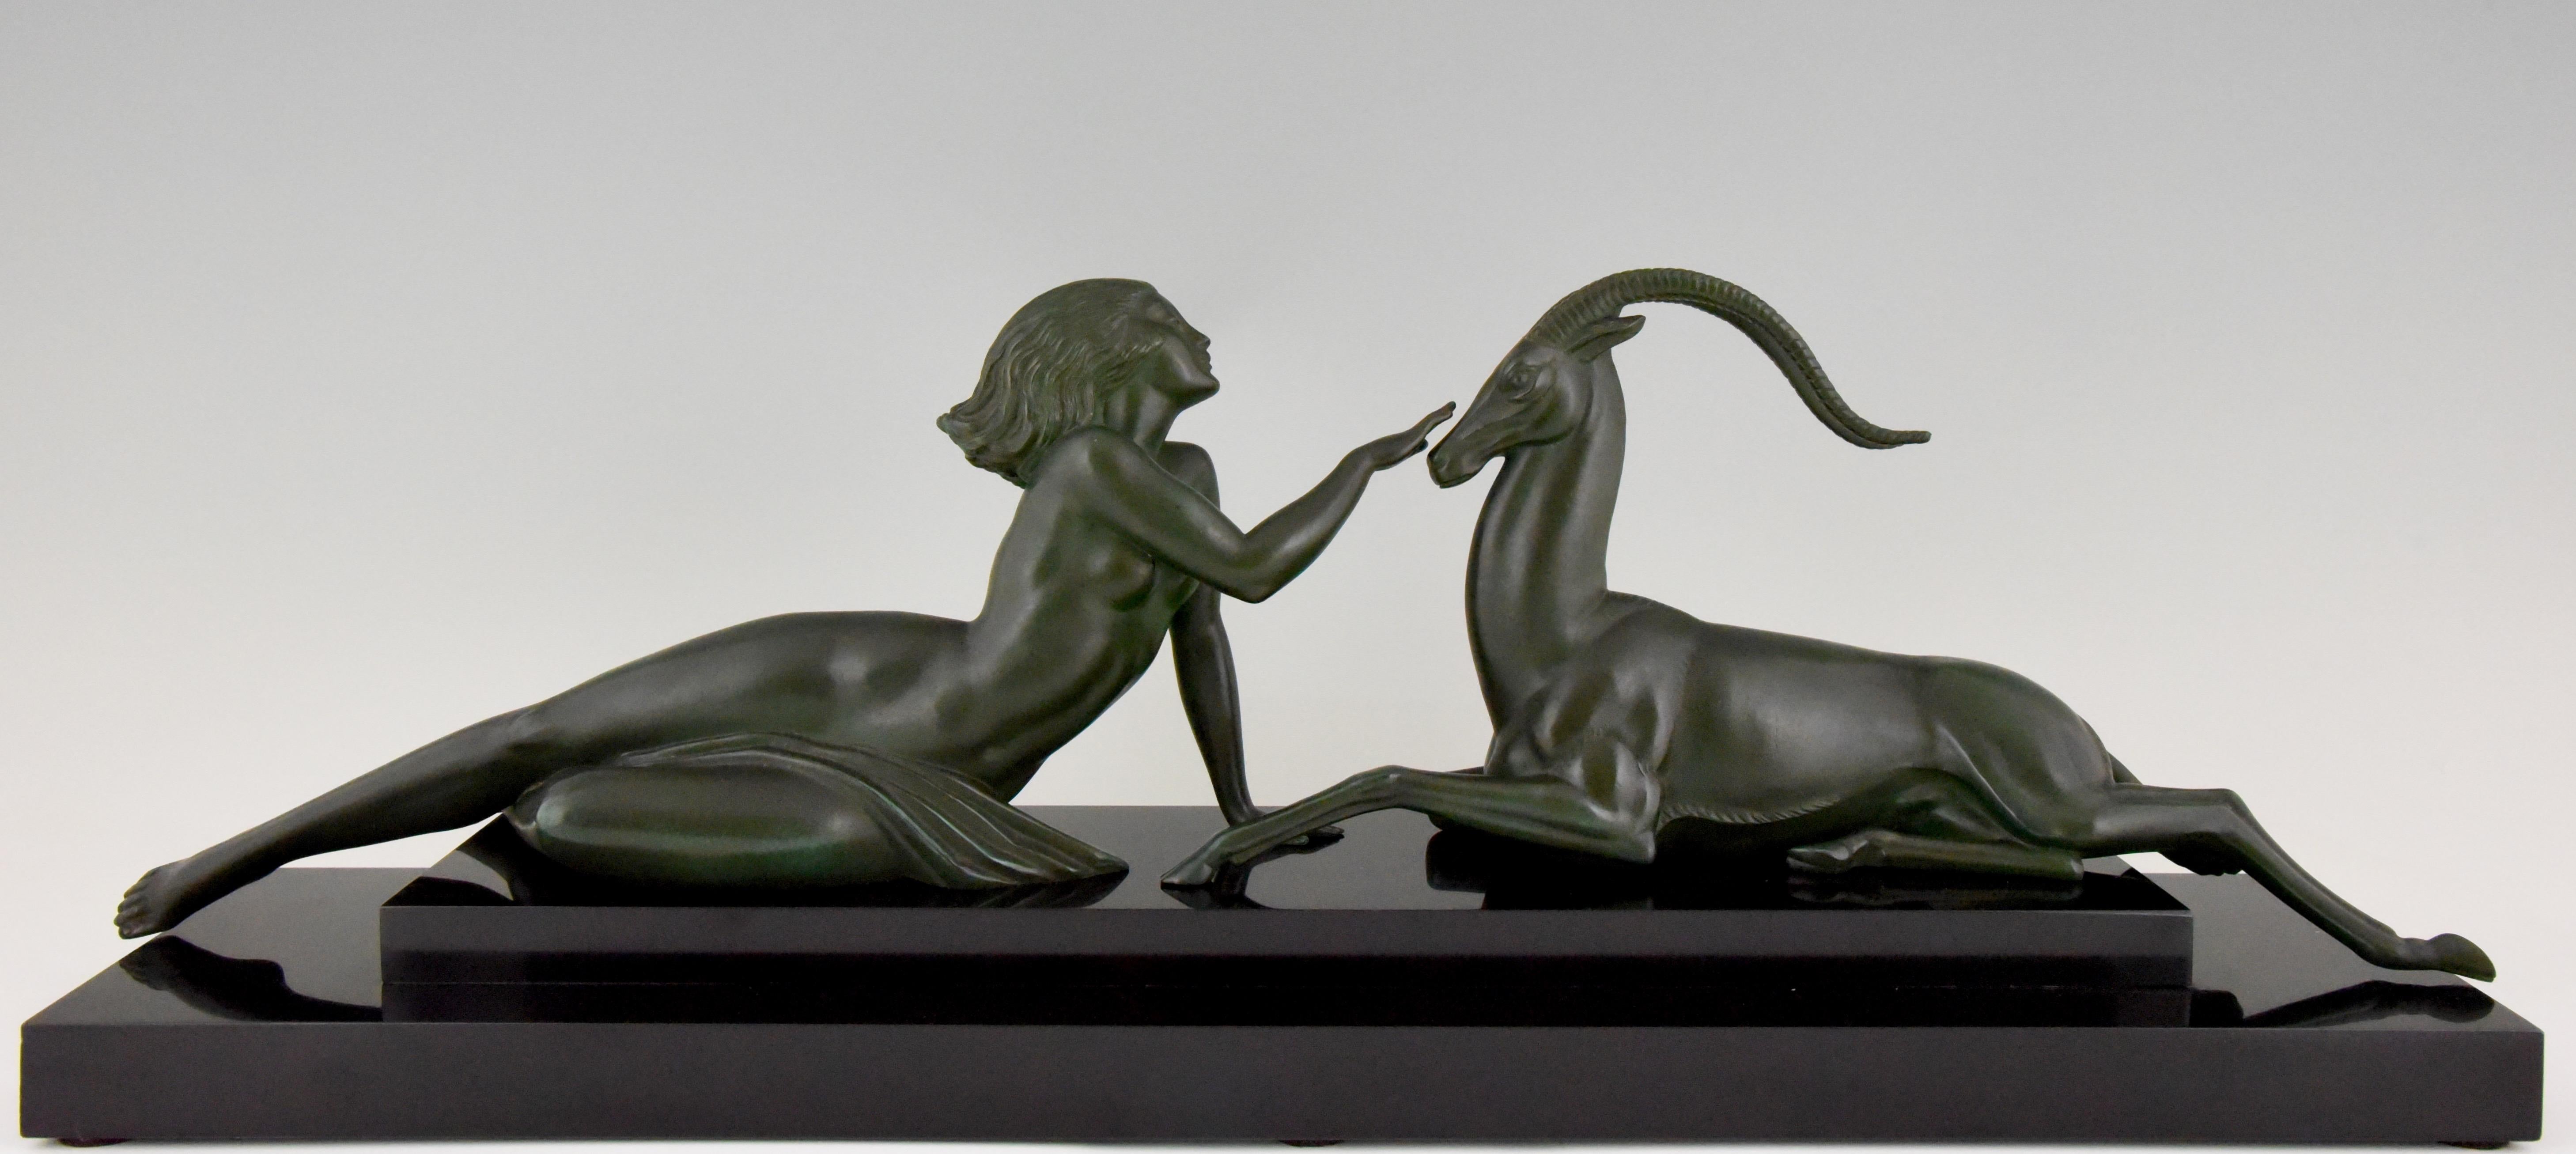 Seduction, Art Deco sculpture of a nude with gazelle. Signed by Fayral, Pierre Le Faguays, France 1930 with Max Le Verrier foundry mark. Art metal with dark green patina on Belgian Black marble base.
This model is illustrated in on page 1149